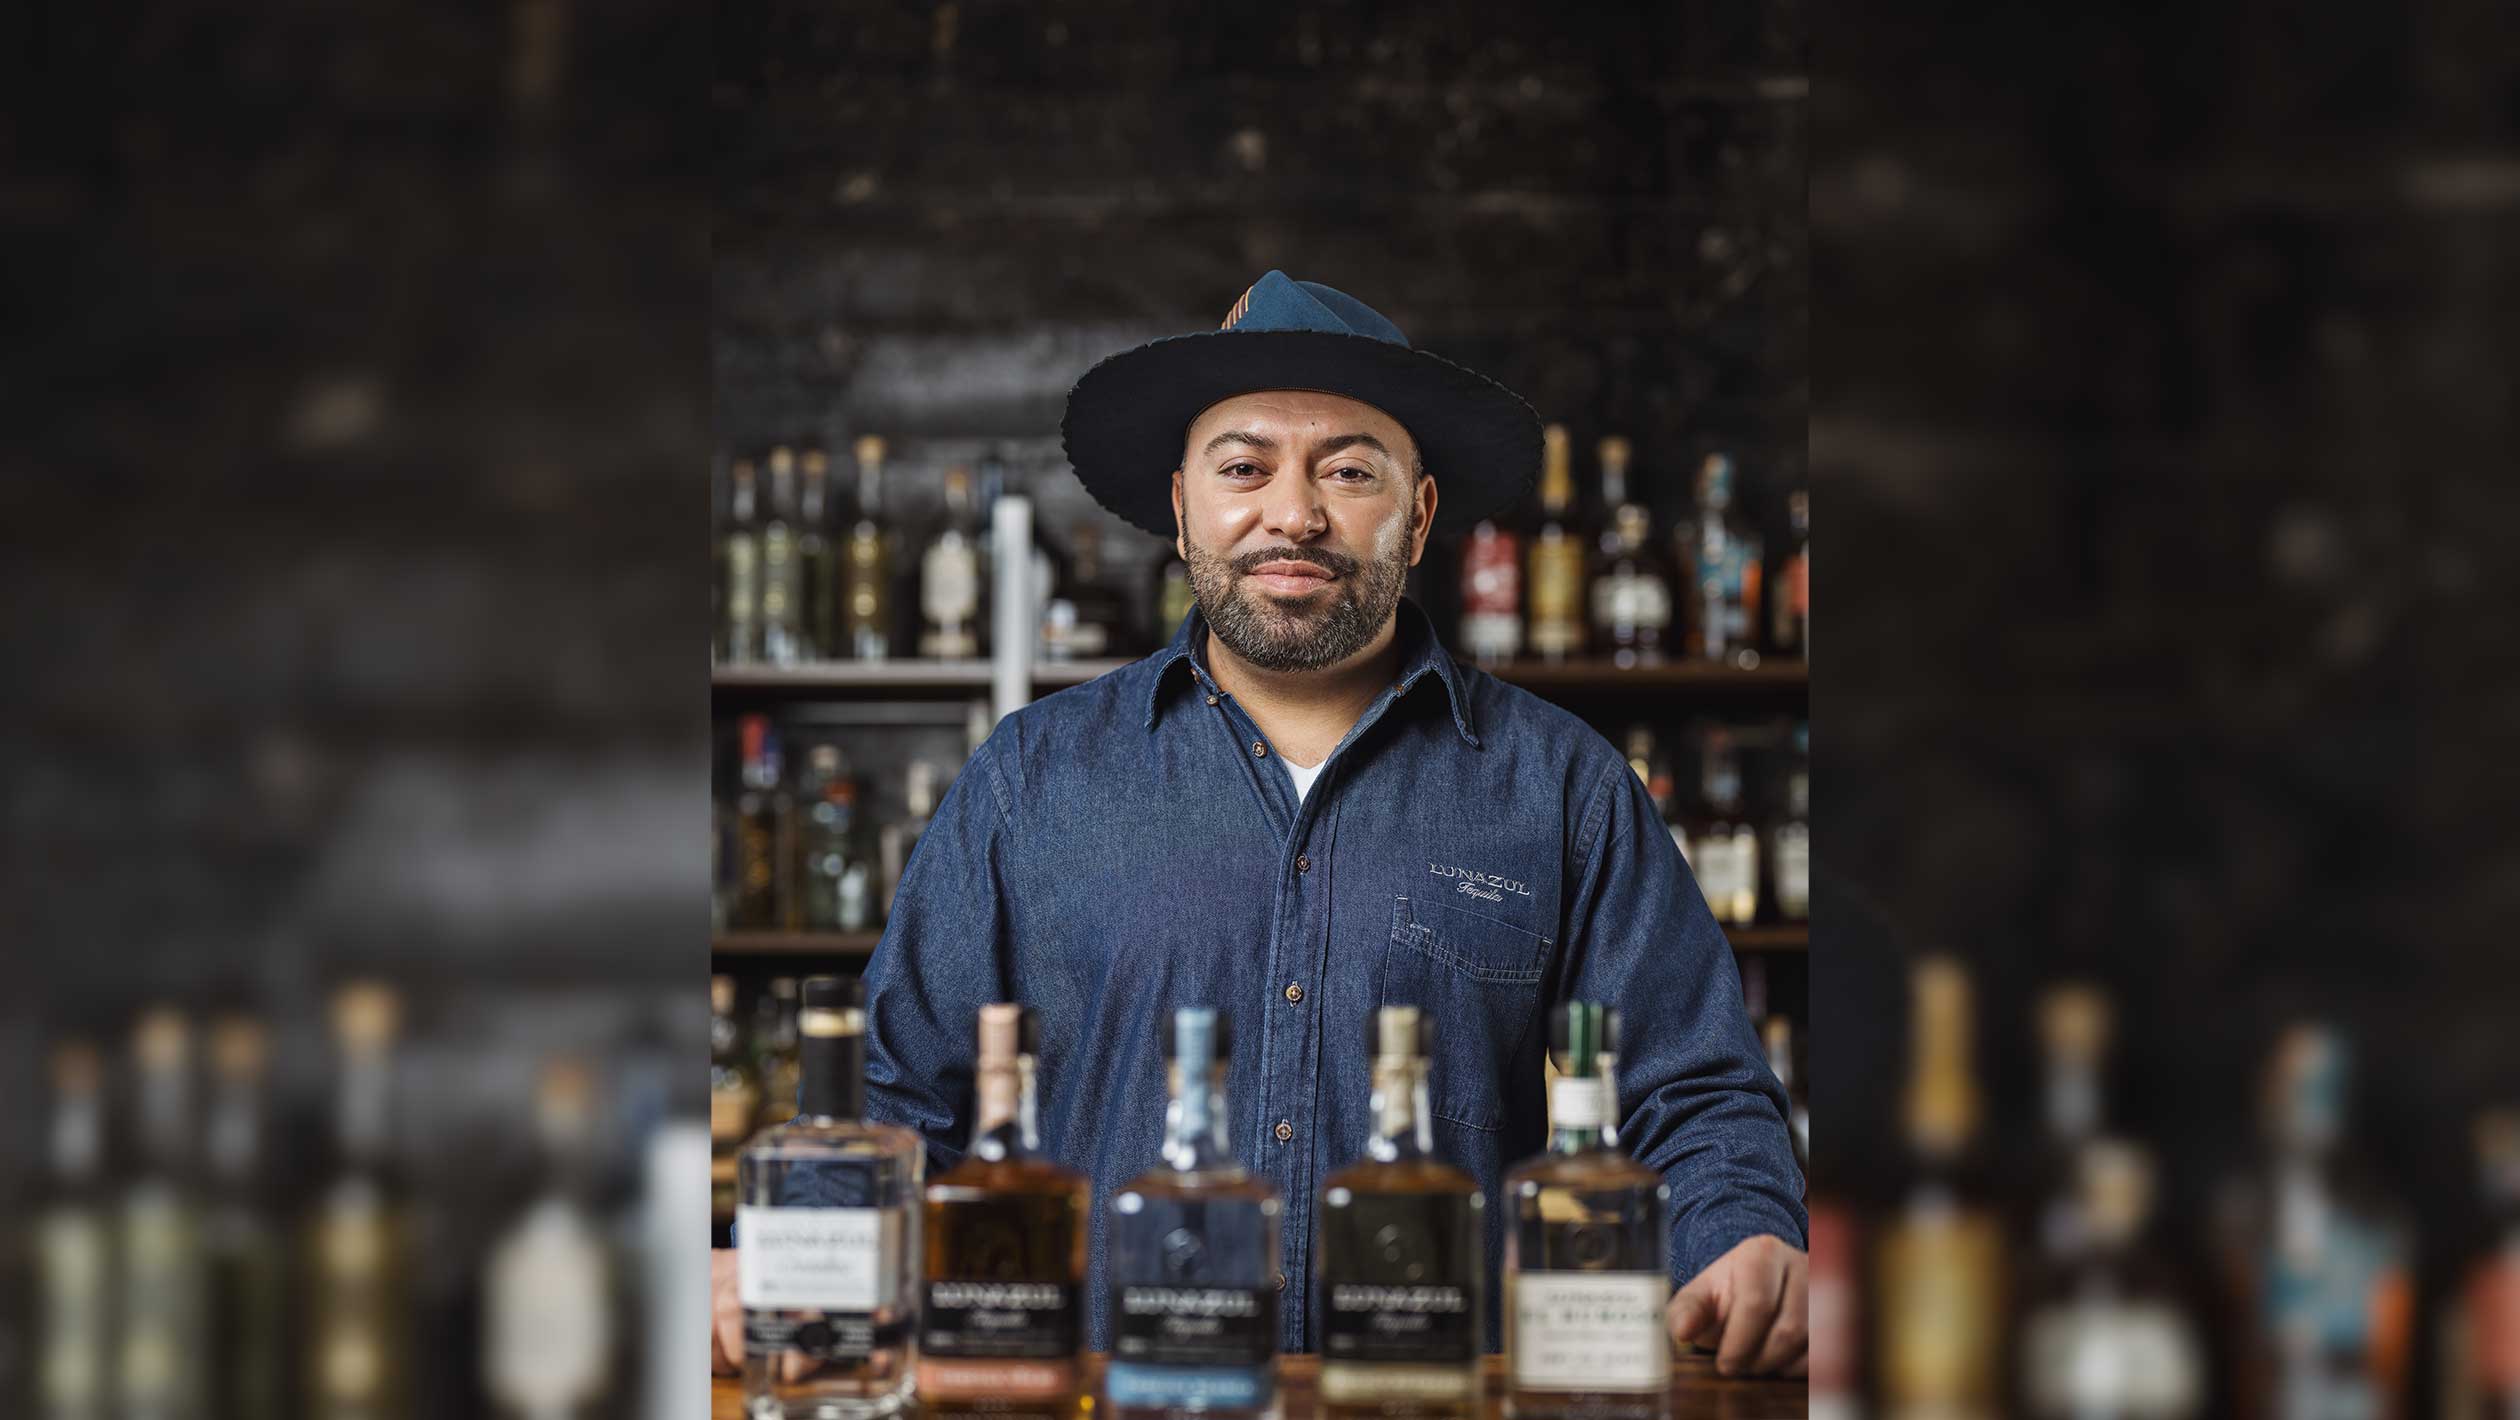 A headshot of Joe Frade as he poses behind a bar with bottles of Lunazul tequila set in front of him.